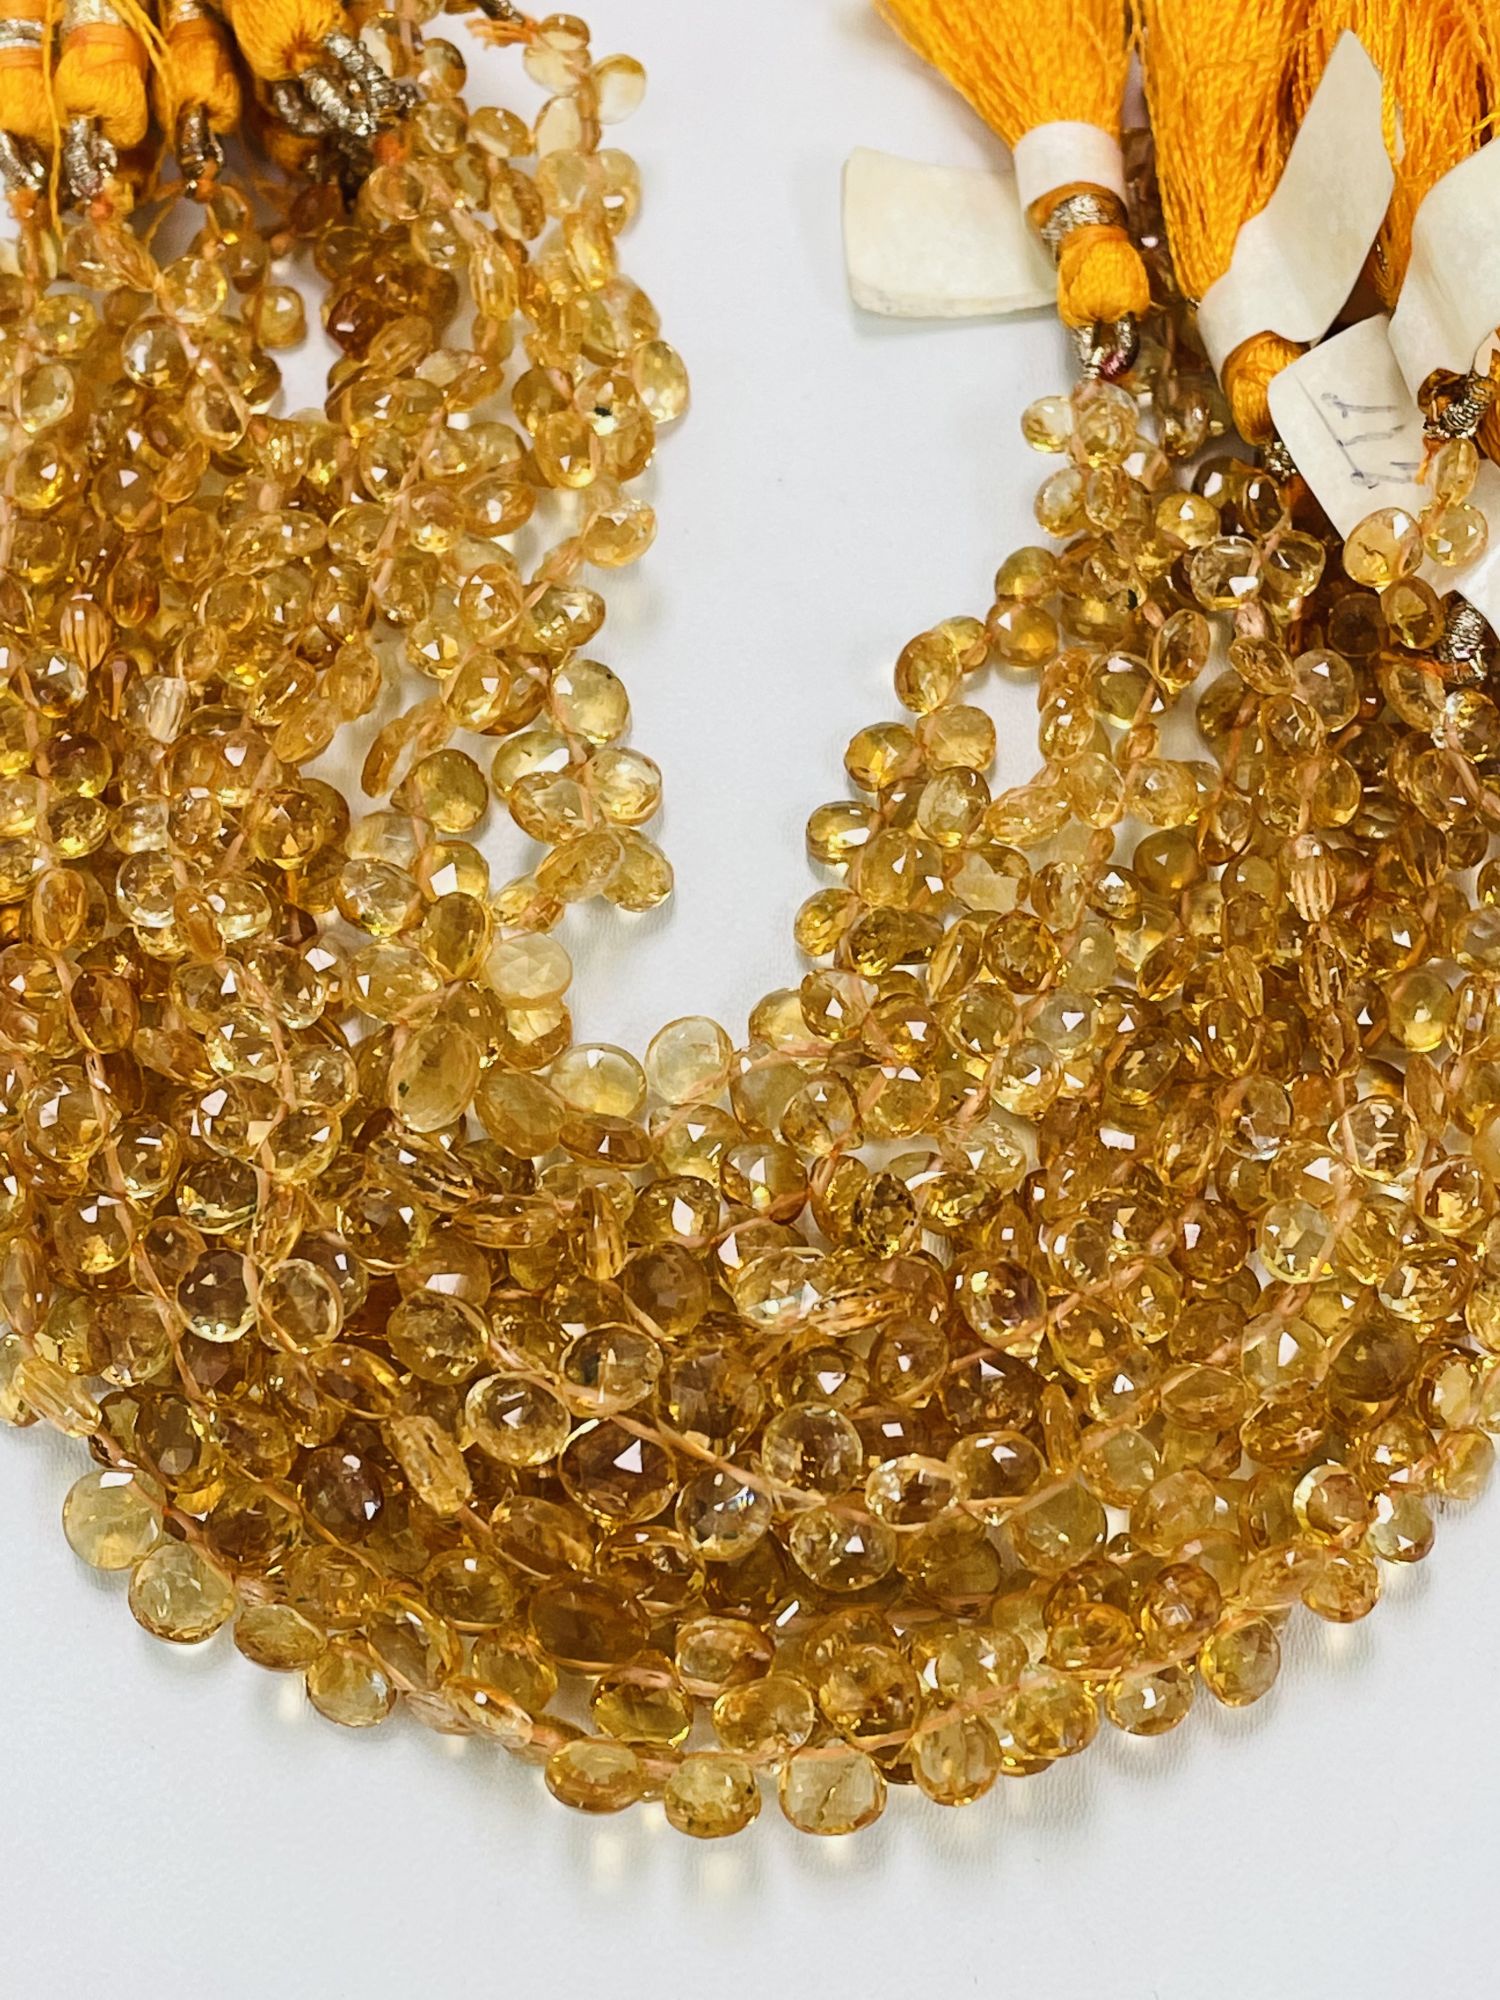 Citrine Heart Faceted